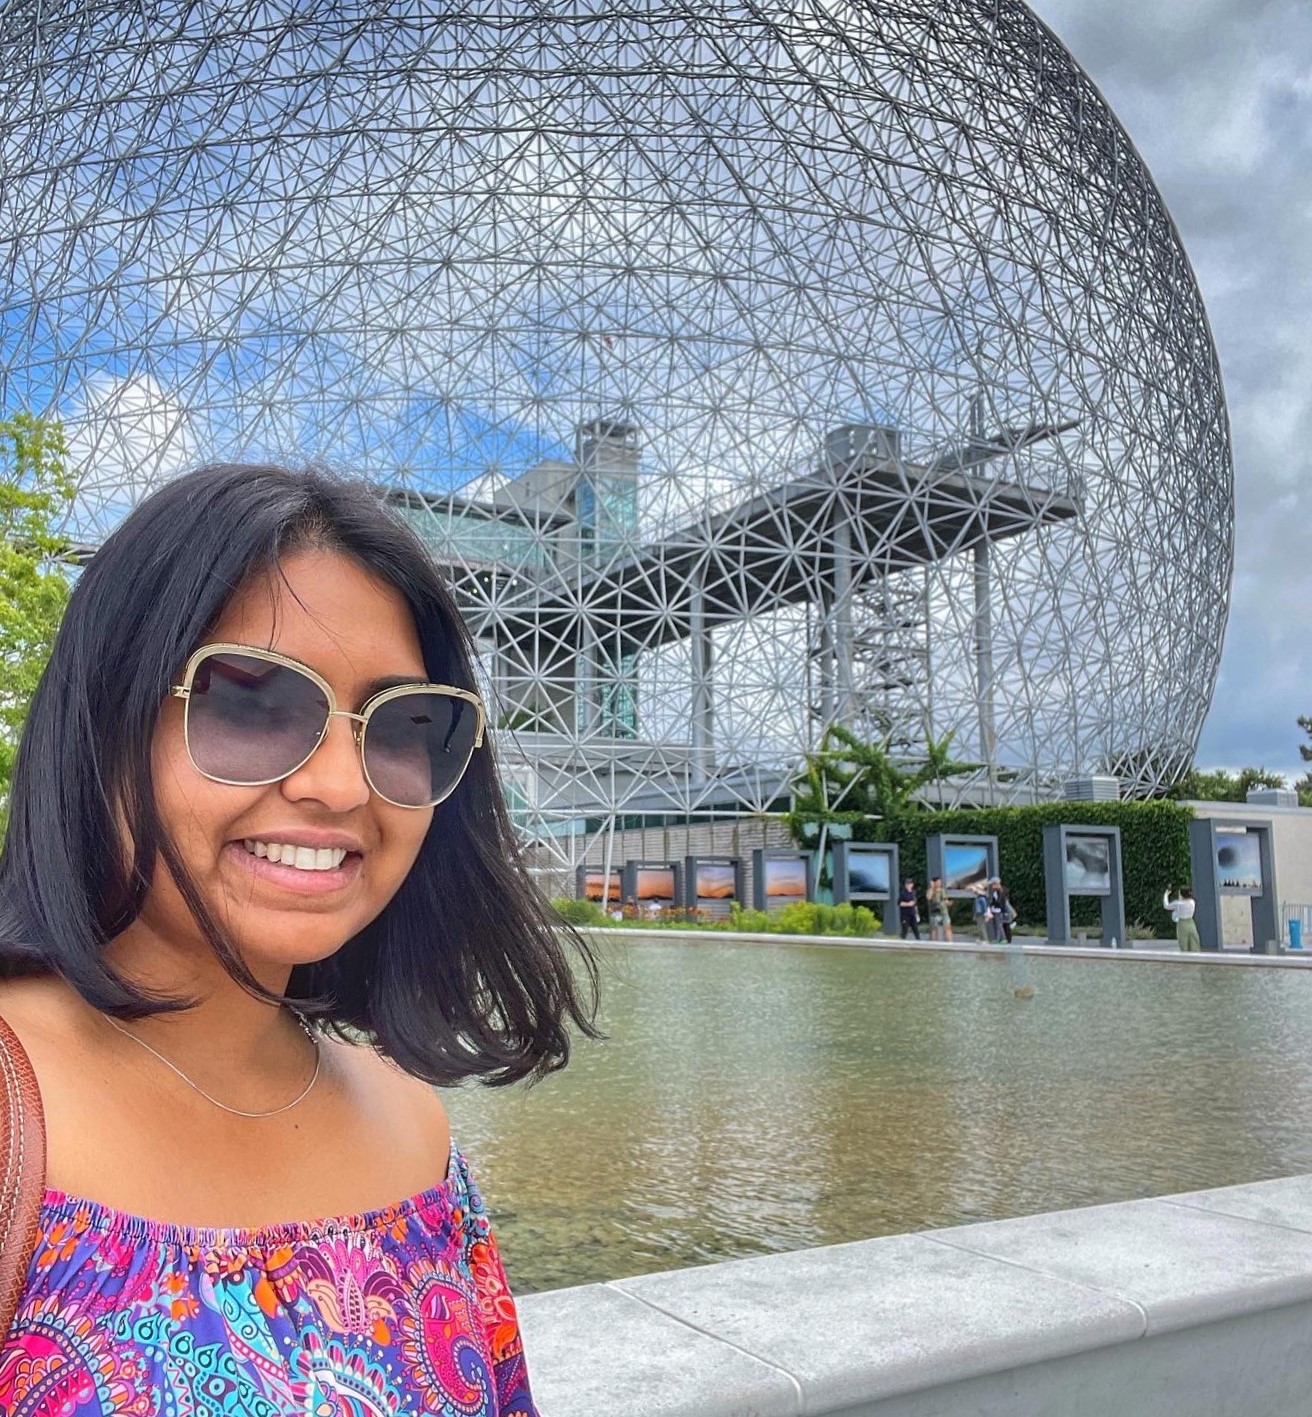 Photo of Canoo member standing in front of the Montreal Biosphere.